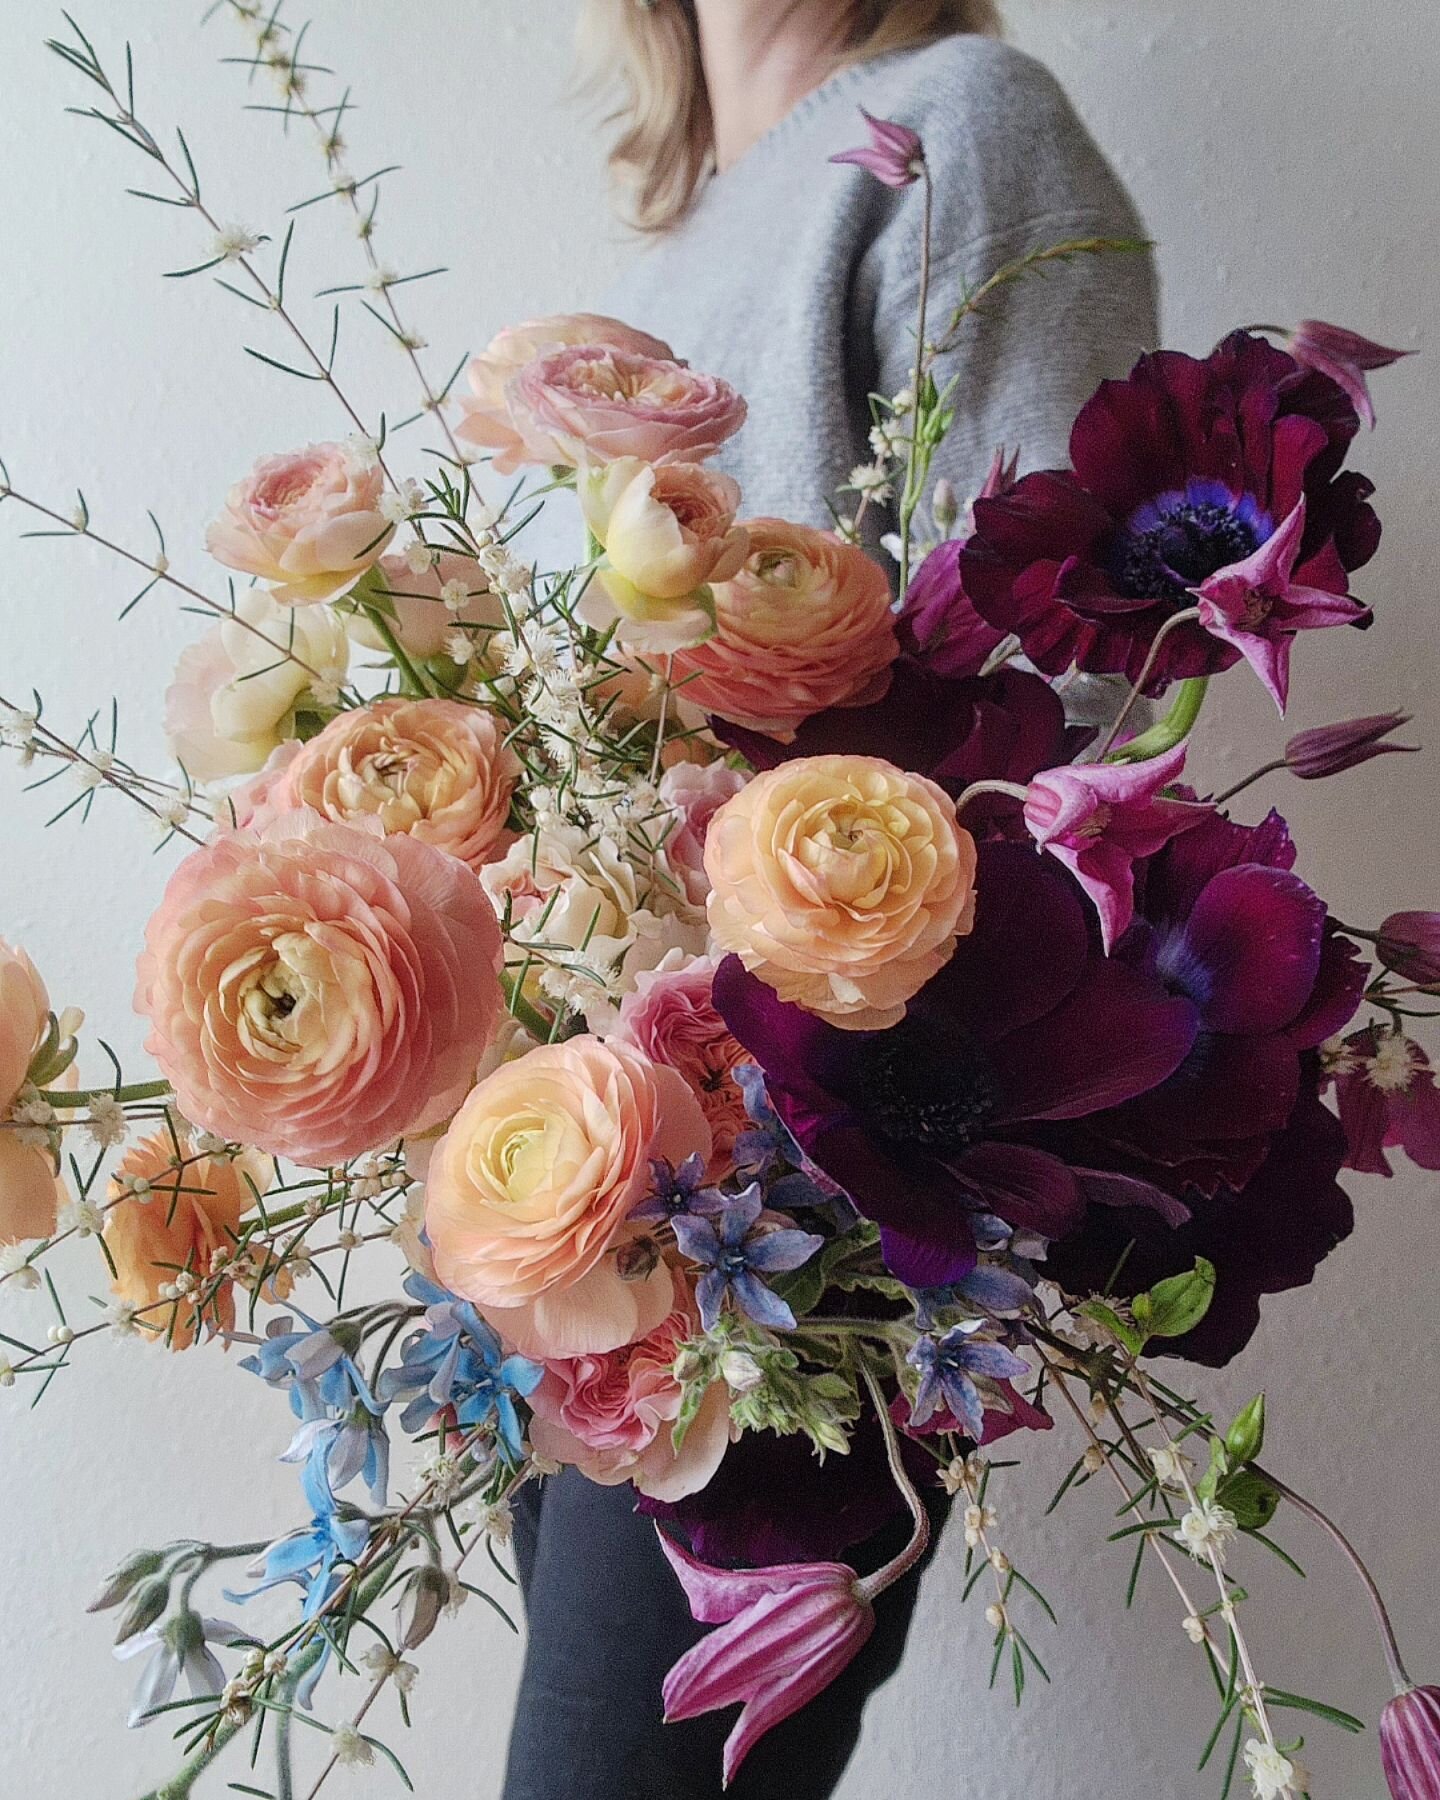 Happy Easter! I went to the market last week with a peach, pink, light blue &amp; lavender color pallet in mind, but this is what we needed up with. What do you think? 

It felt really good to do some bouquet play instead of a vase arrangement. Check